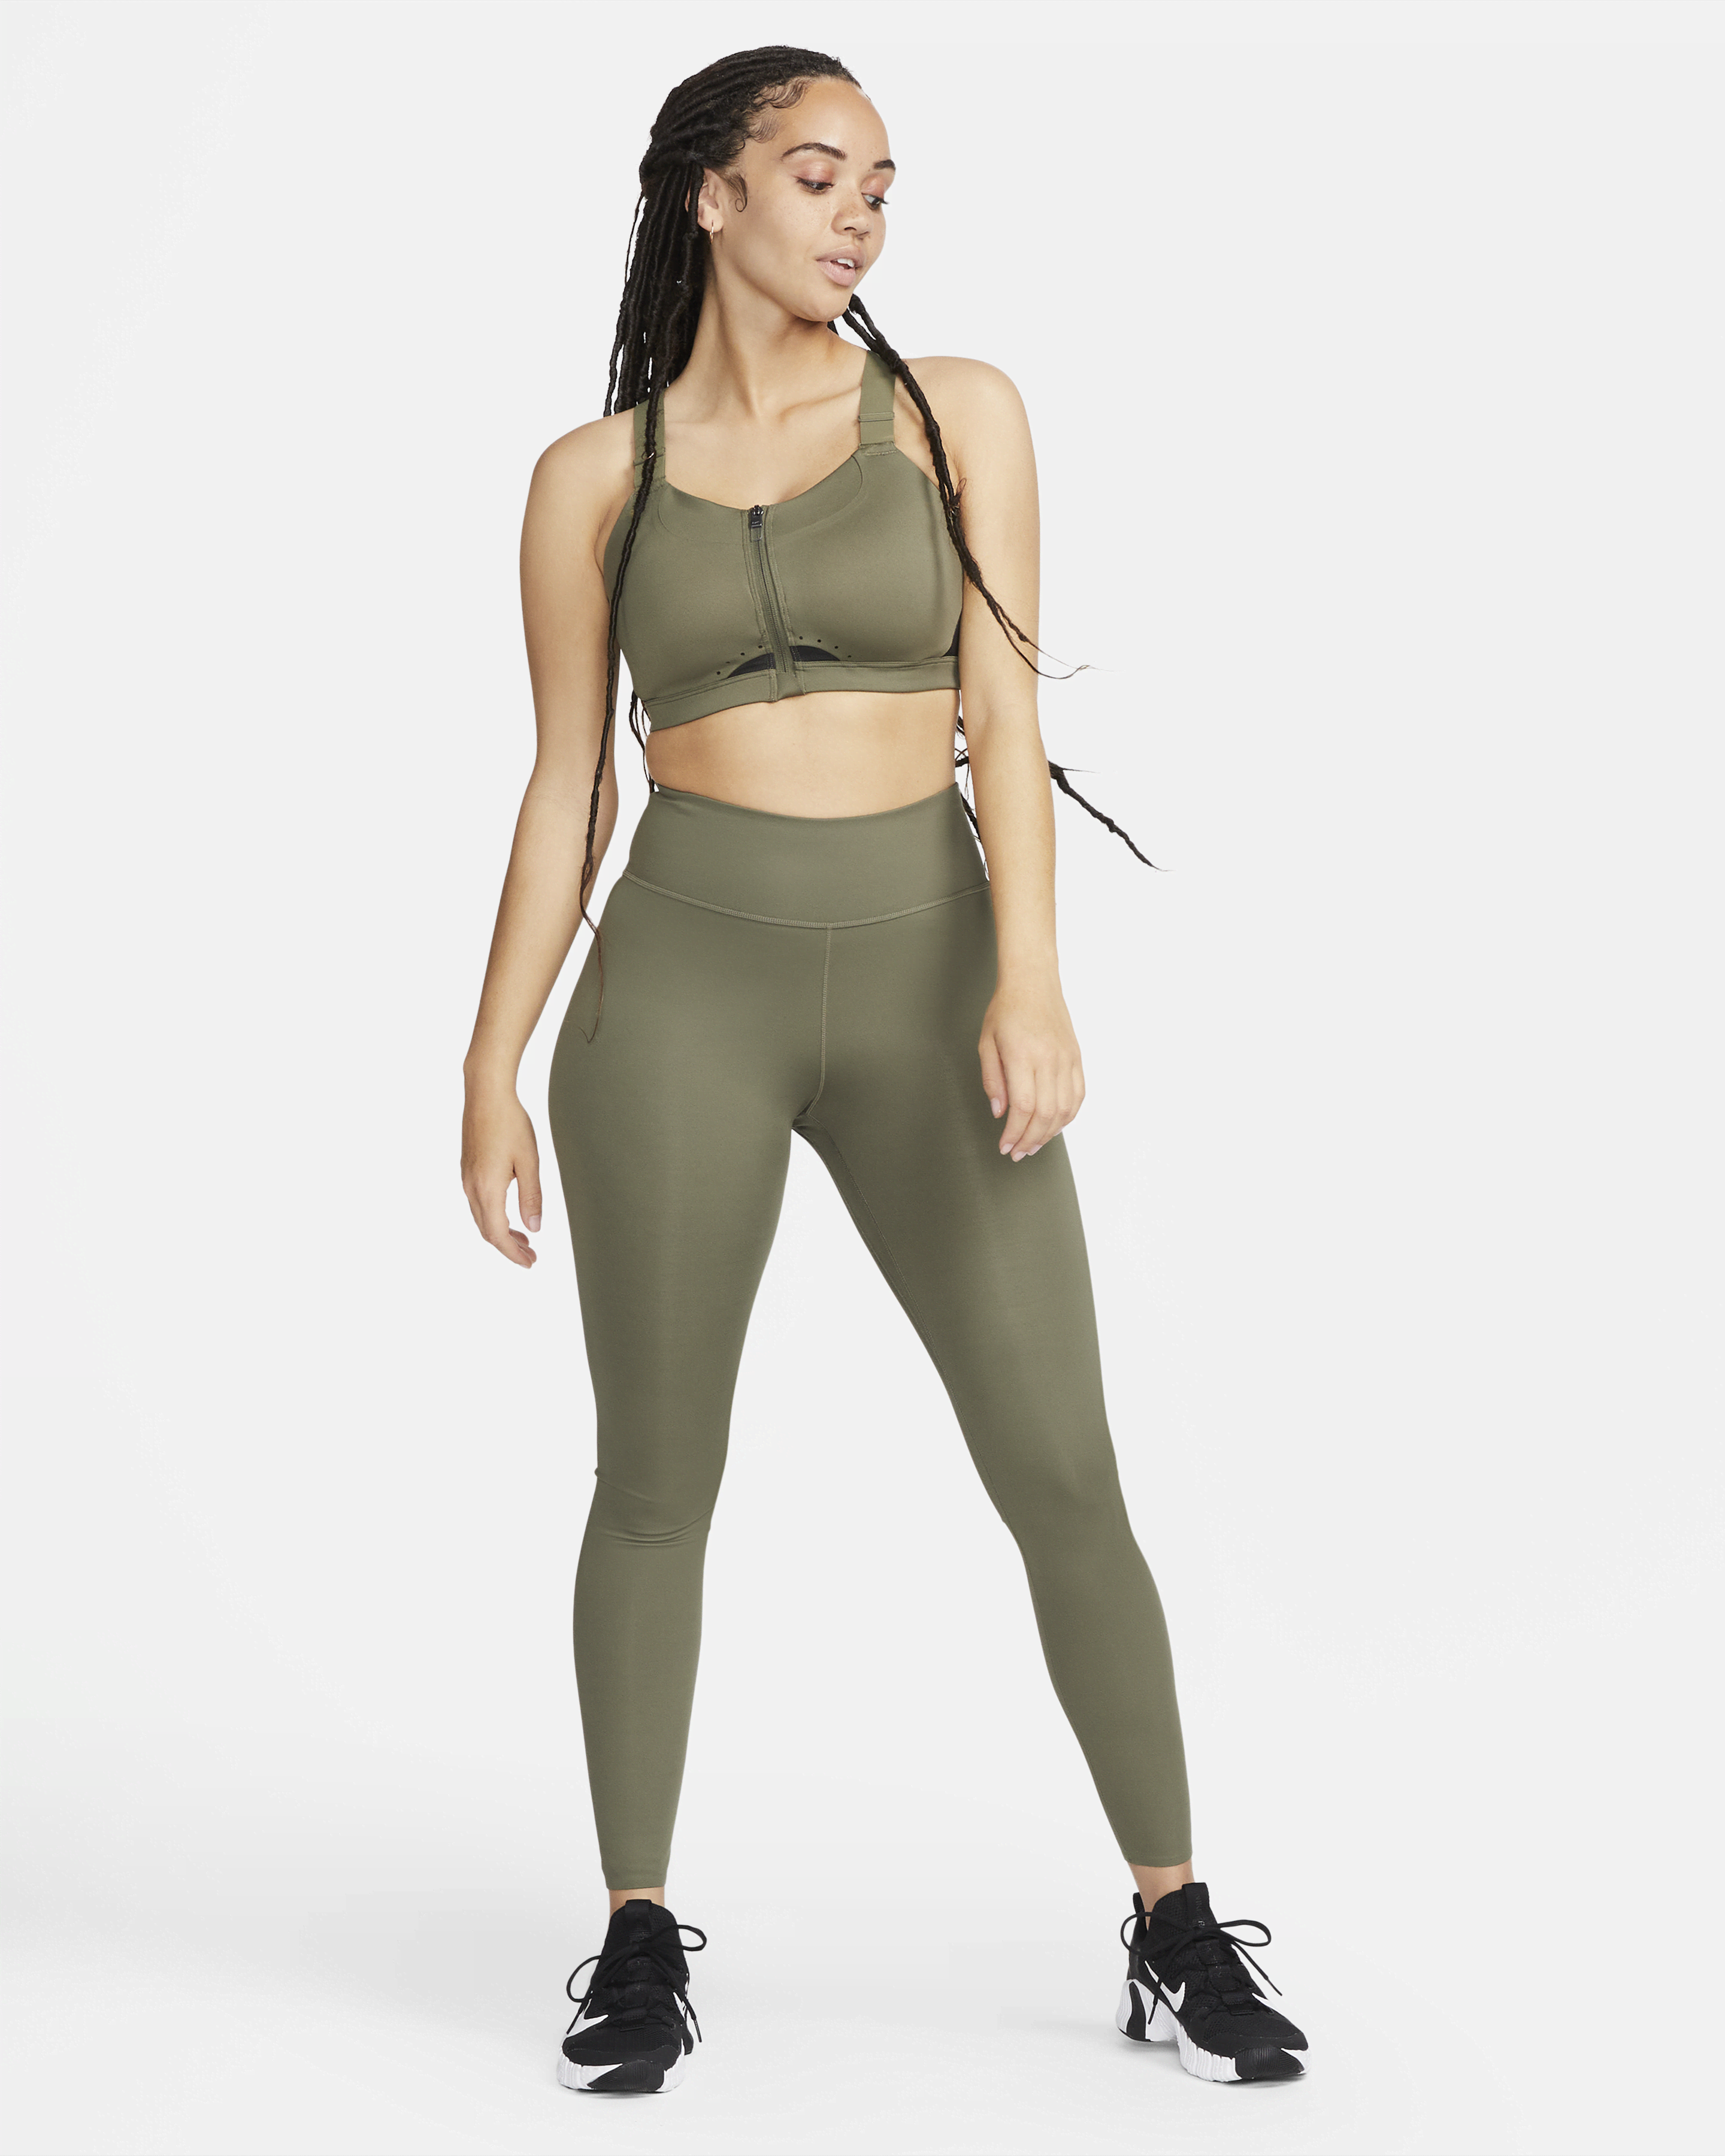 Nimble Activewear - Easy to get on and take off ✔️. Our new Brace Your  Boobs Bra has an adjustable clasp in the back and was designed to support  the girls during